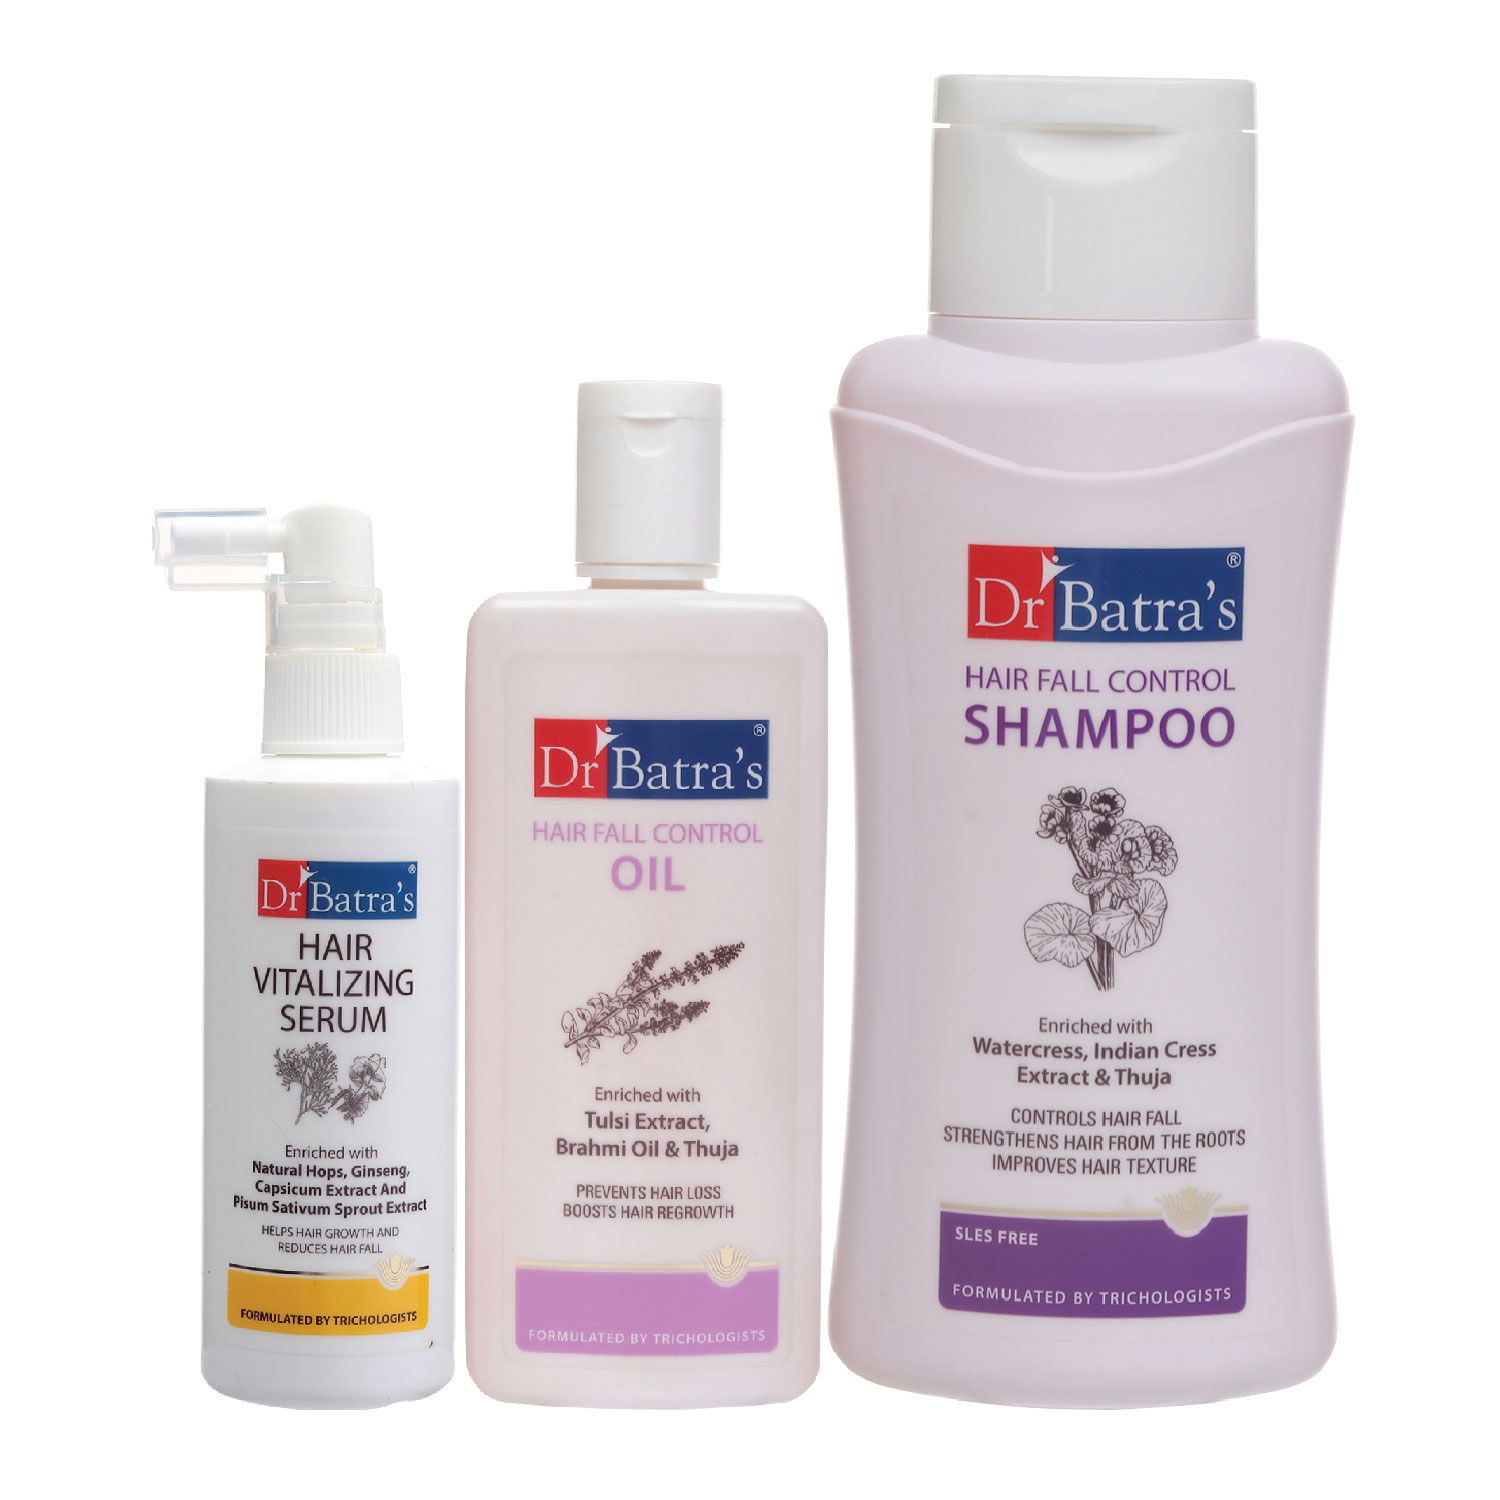 Dr. Batra's Henna Shampoo 200 ML & Amla Conditioner 100 ML (2 Items In The  Set) For Rs. 127 @ 60 % - Deals